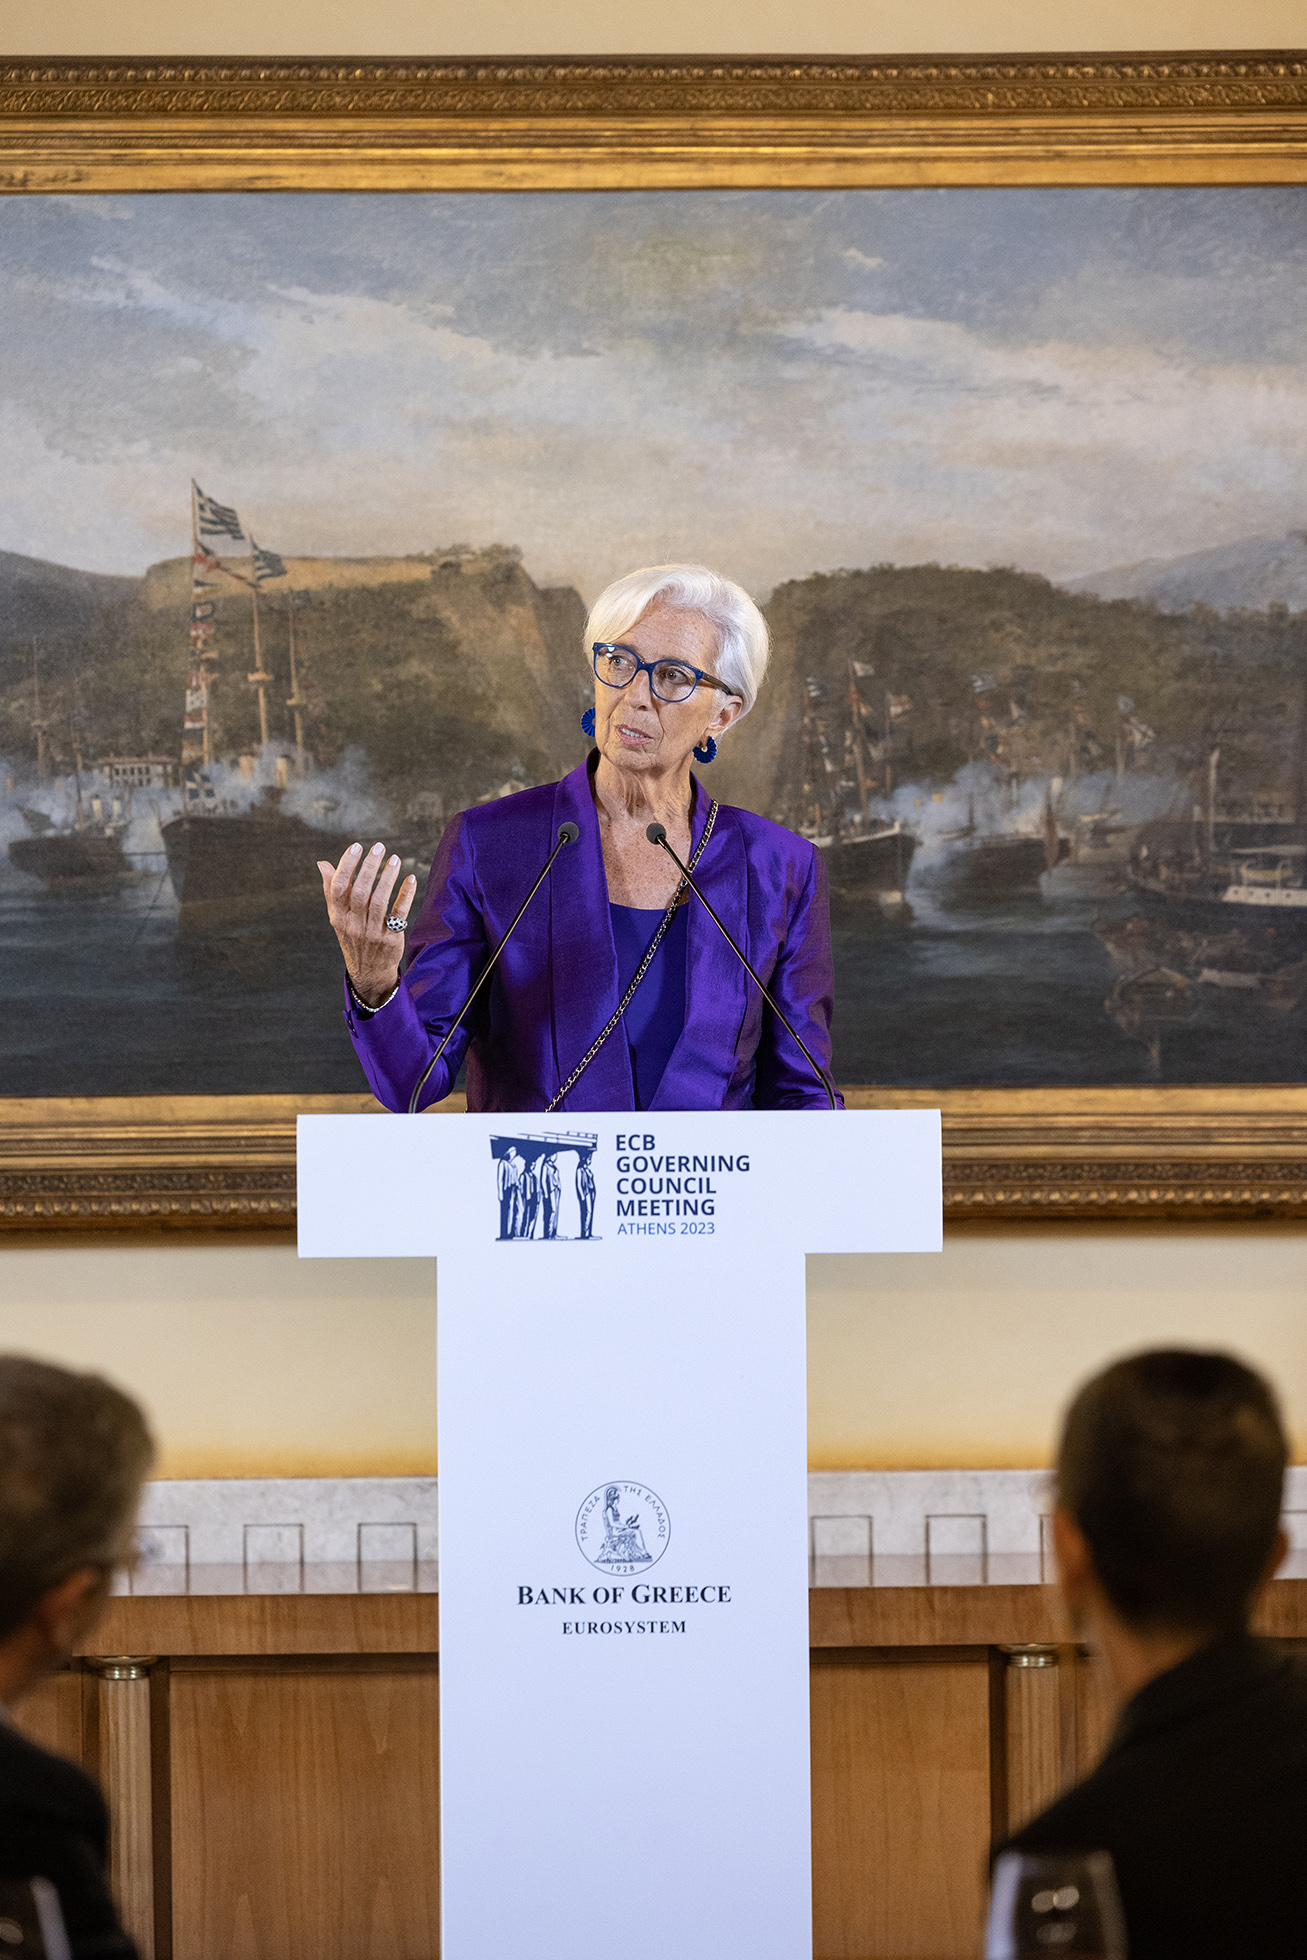 Watch Christine Lagarde’s address live from the Bank of Greece